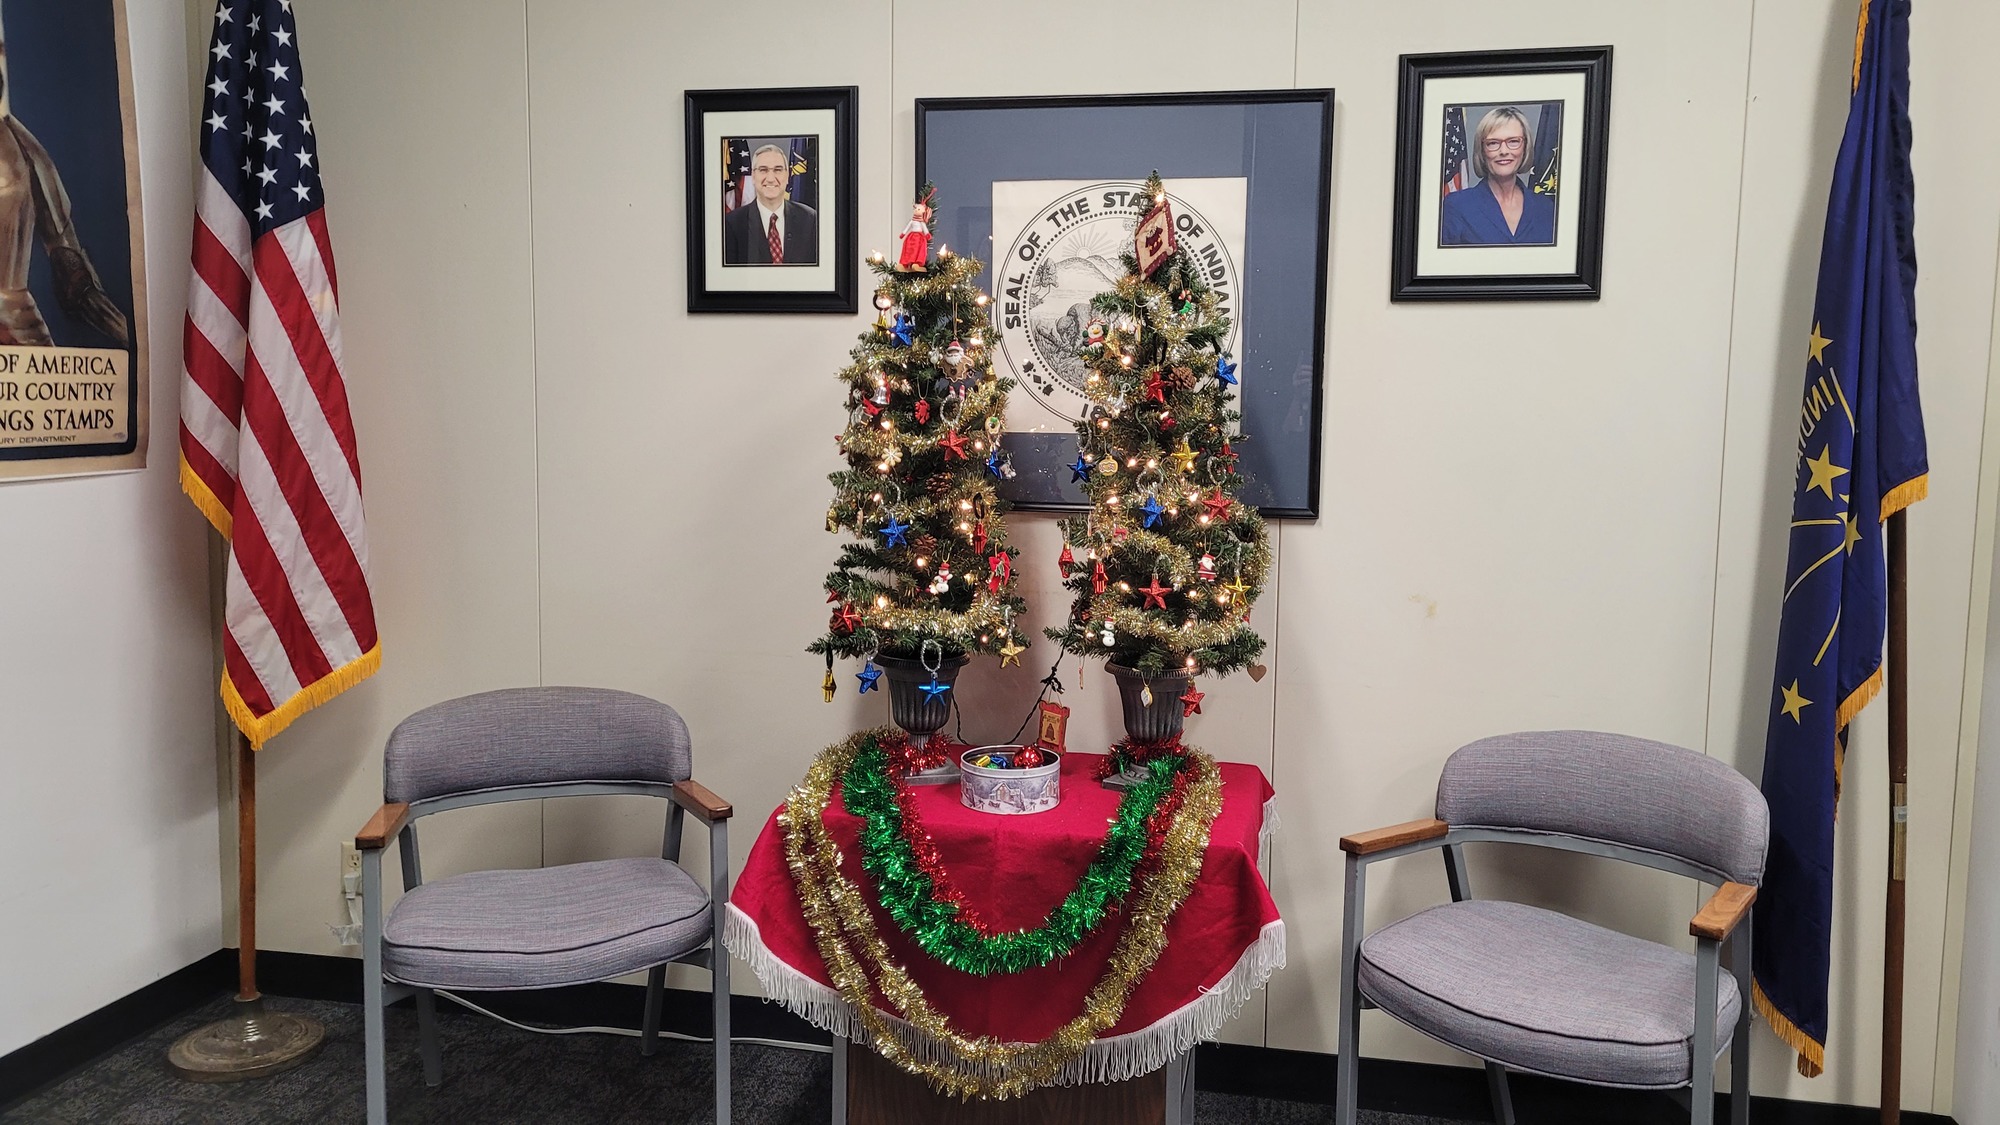 IARA office Christmas trees in front of the Indiana State Seal, with guest chairs on either side, and behind them, the U.S. flag and a photo of Gov. Eric Holcomb on the left, and a photo of Lt. Governor Suzanne Crouch and the Indiana State flag on the right.